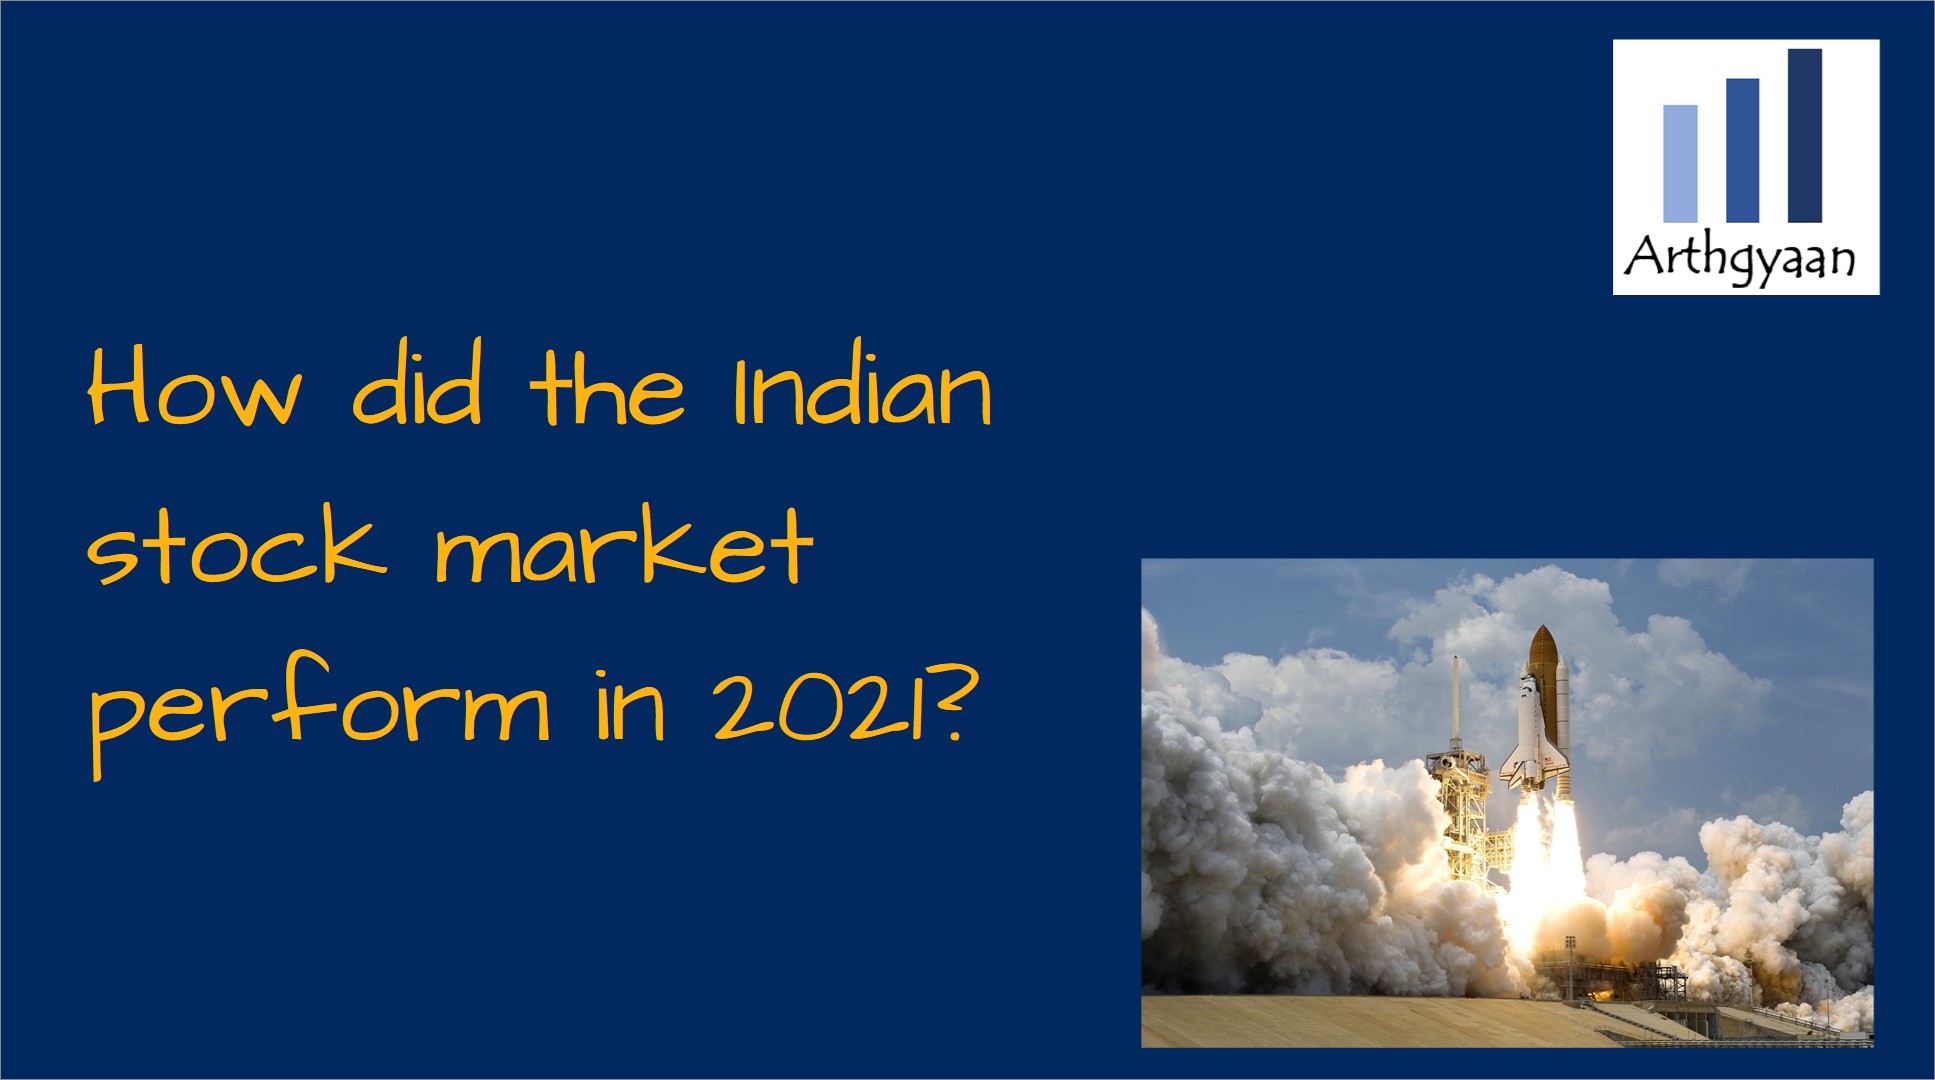 How did the Indian stock market perform in 2021?